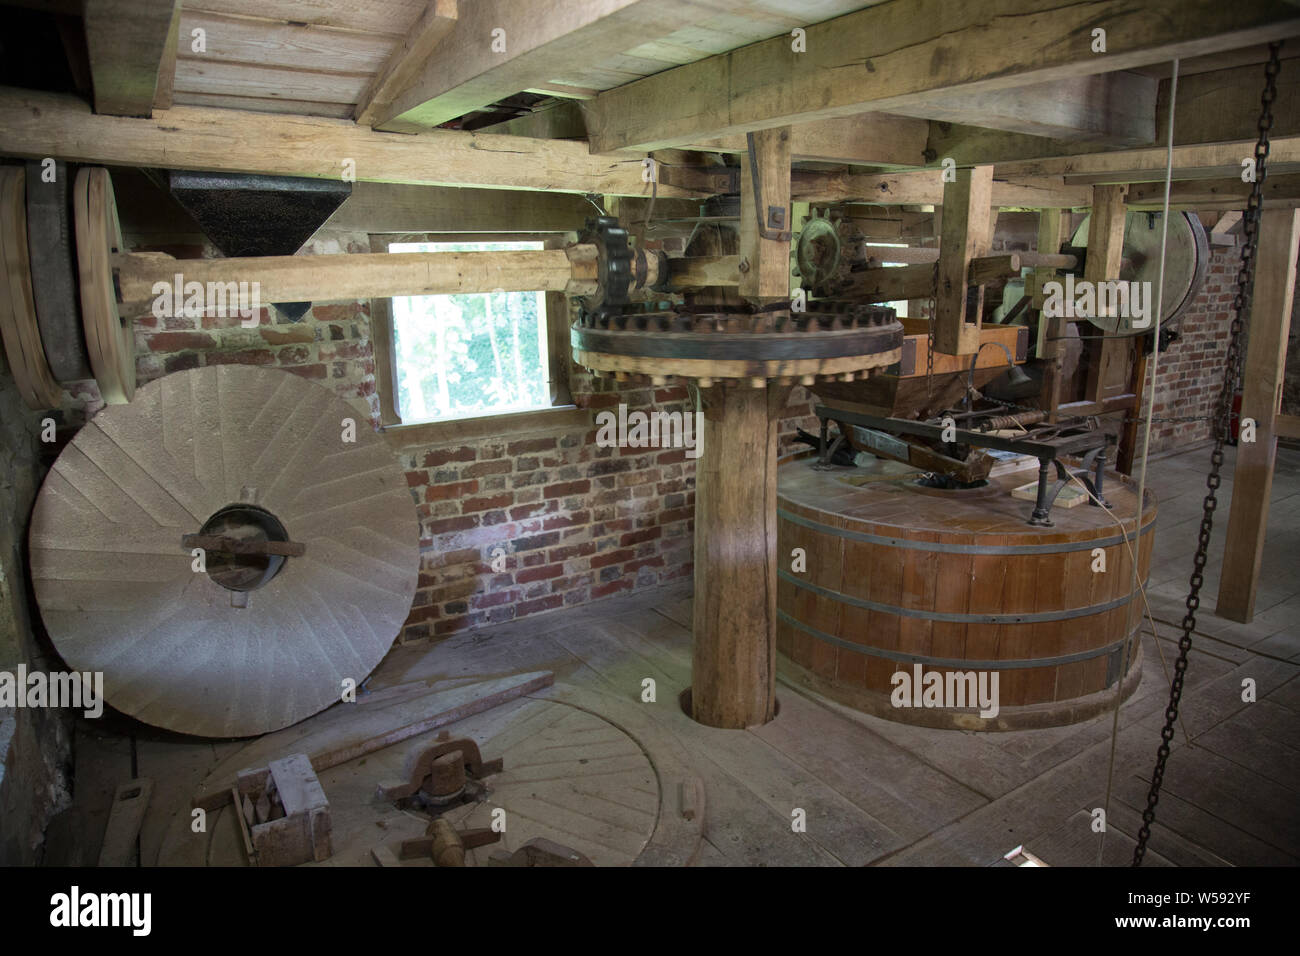 Flour grinding machinery in a 19th century water mill, Sussex, England Stock Photo